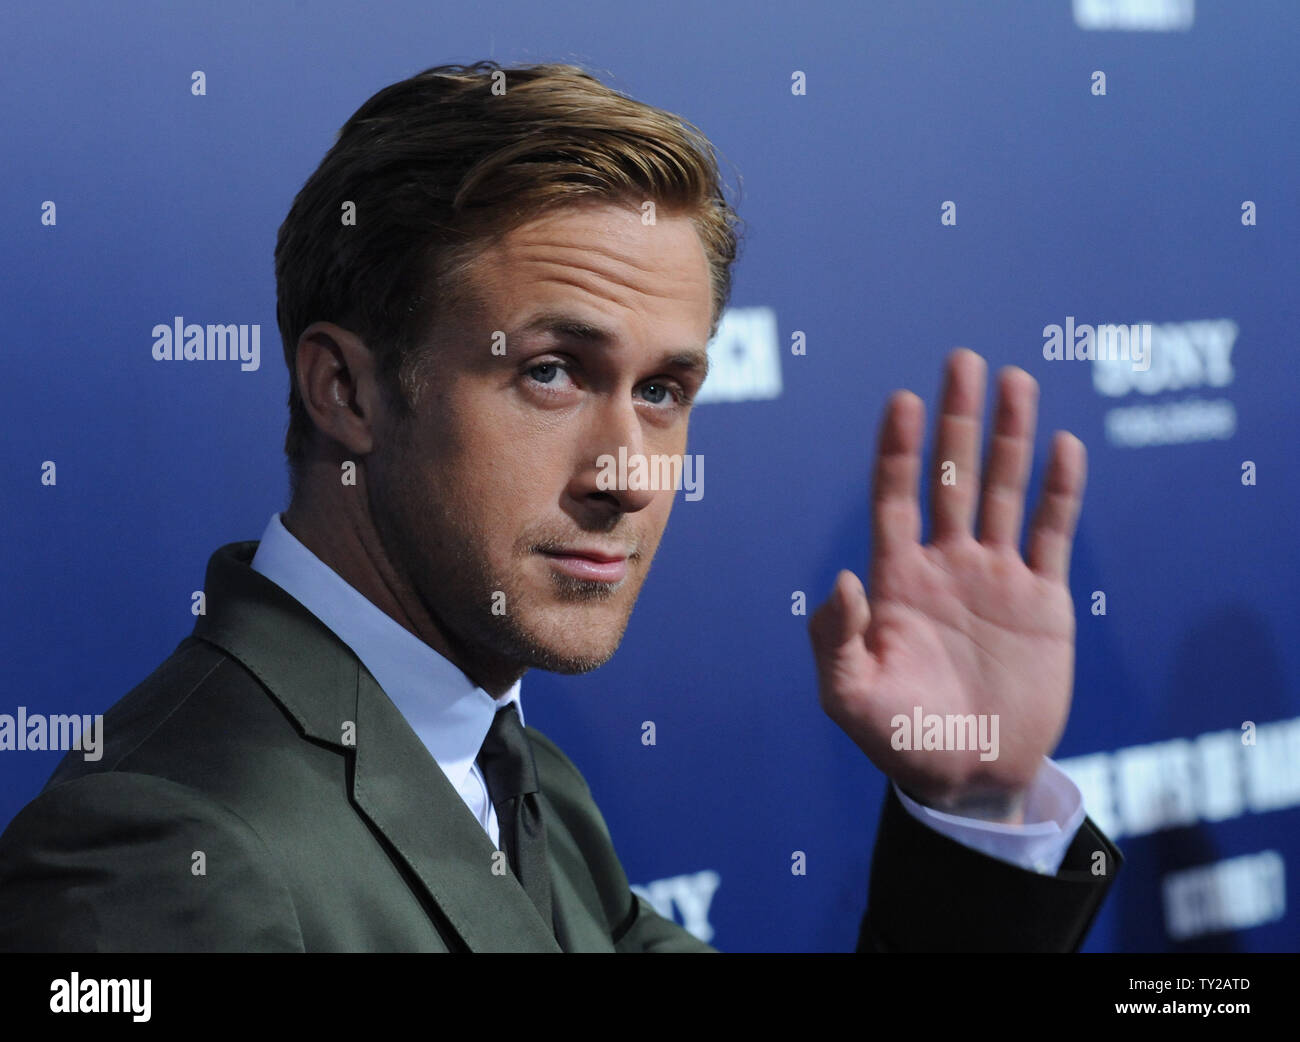 Ryan Gosling A Cast Member In The Motion Picture Political Drama The Ides Of March Attends